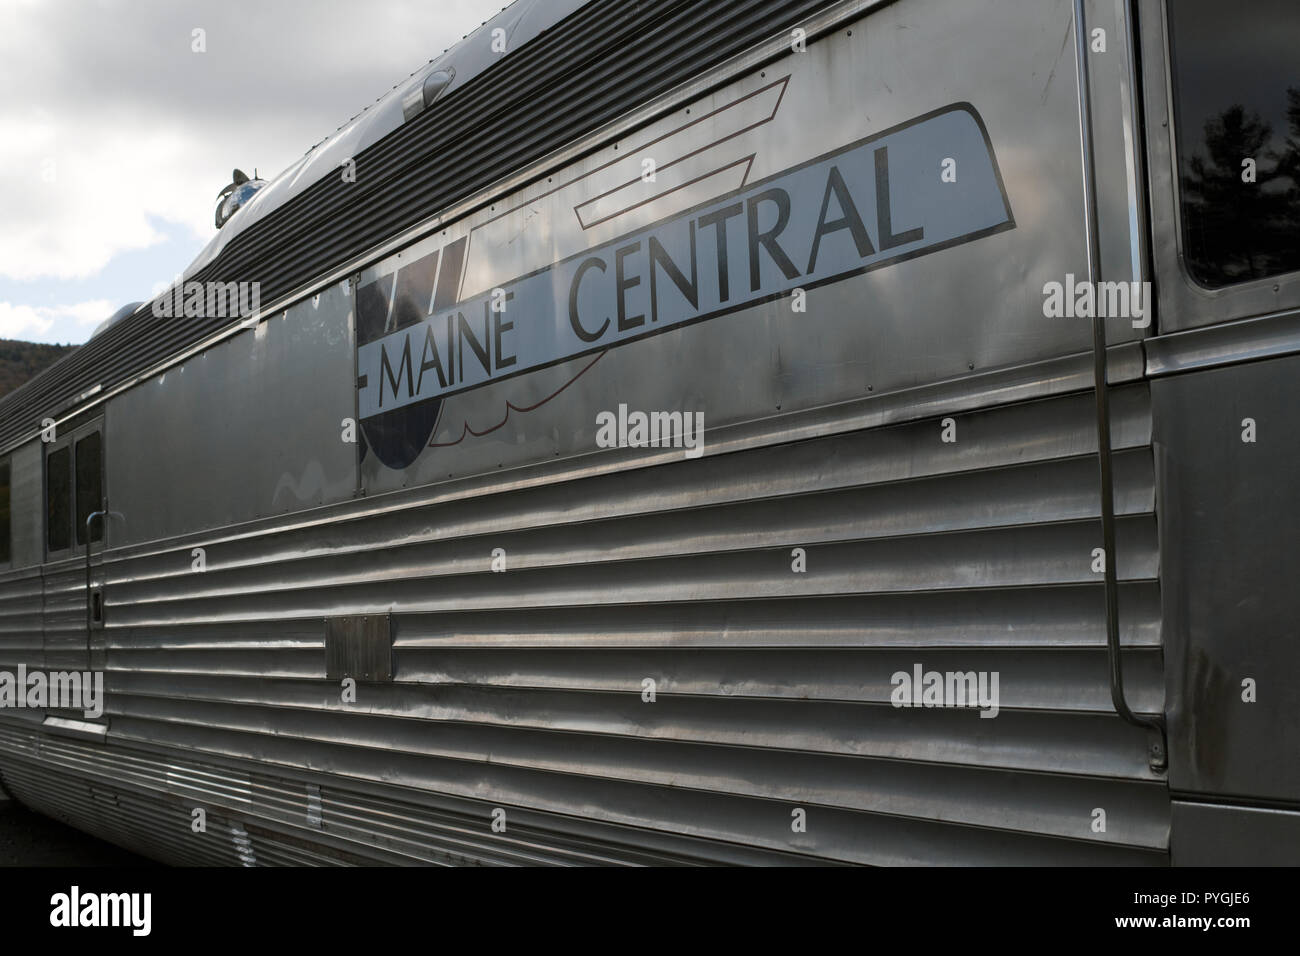 Maine Central railroad cars on exhibit in Lincoln New Hampshire Stock ...